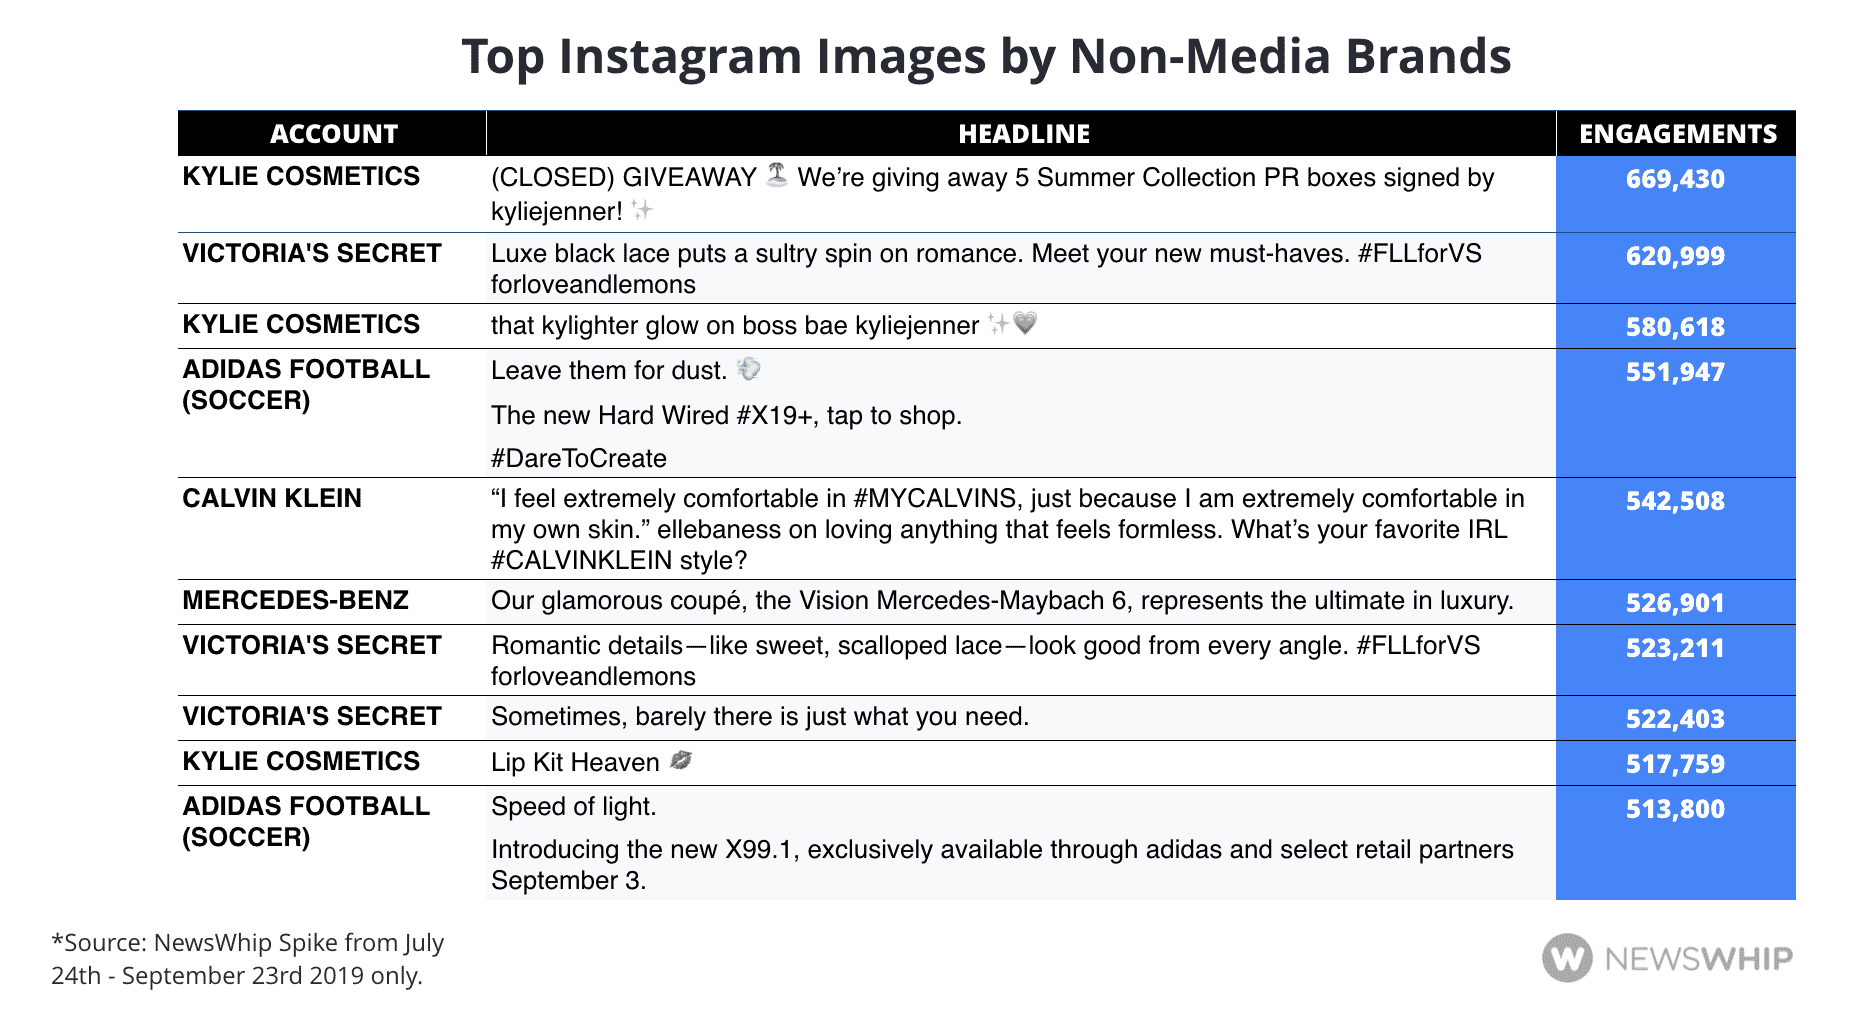 Table showing the top Instagram images from non-media brands in Q3 2019